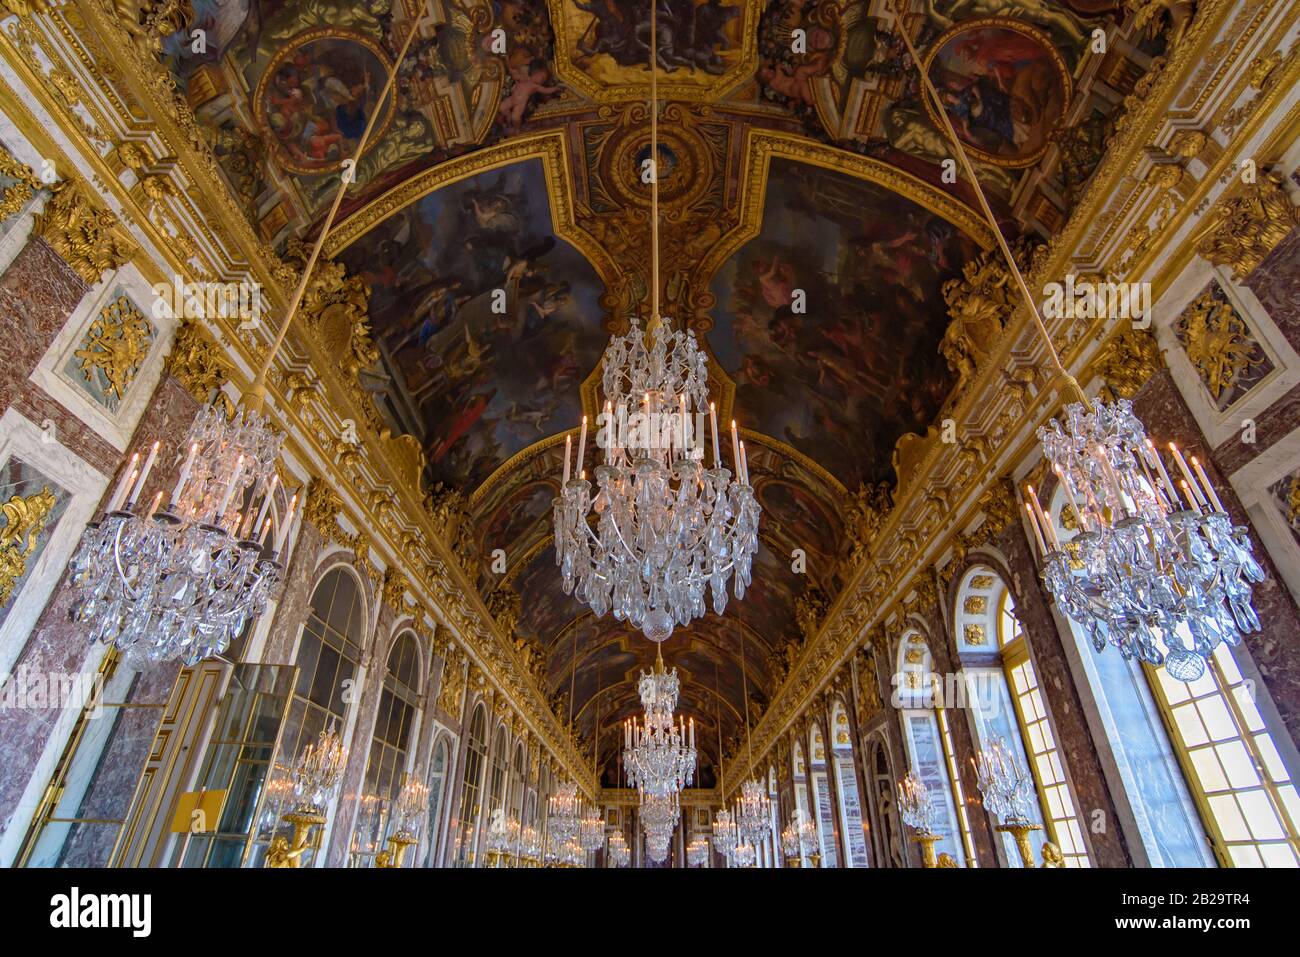 The Hall of Mirrors, Palace of Versailles, Paris, France Stock Photo